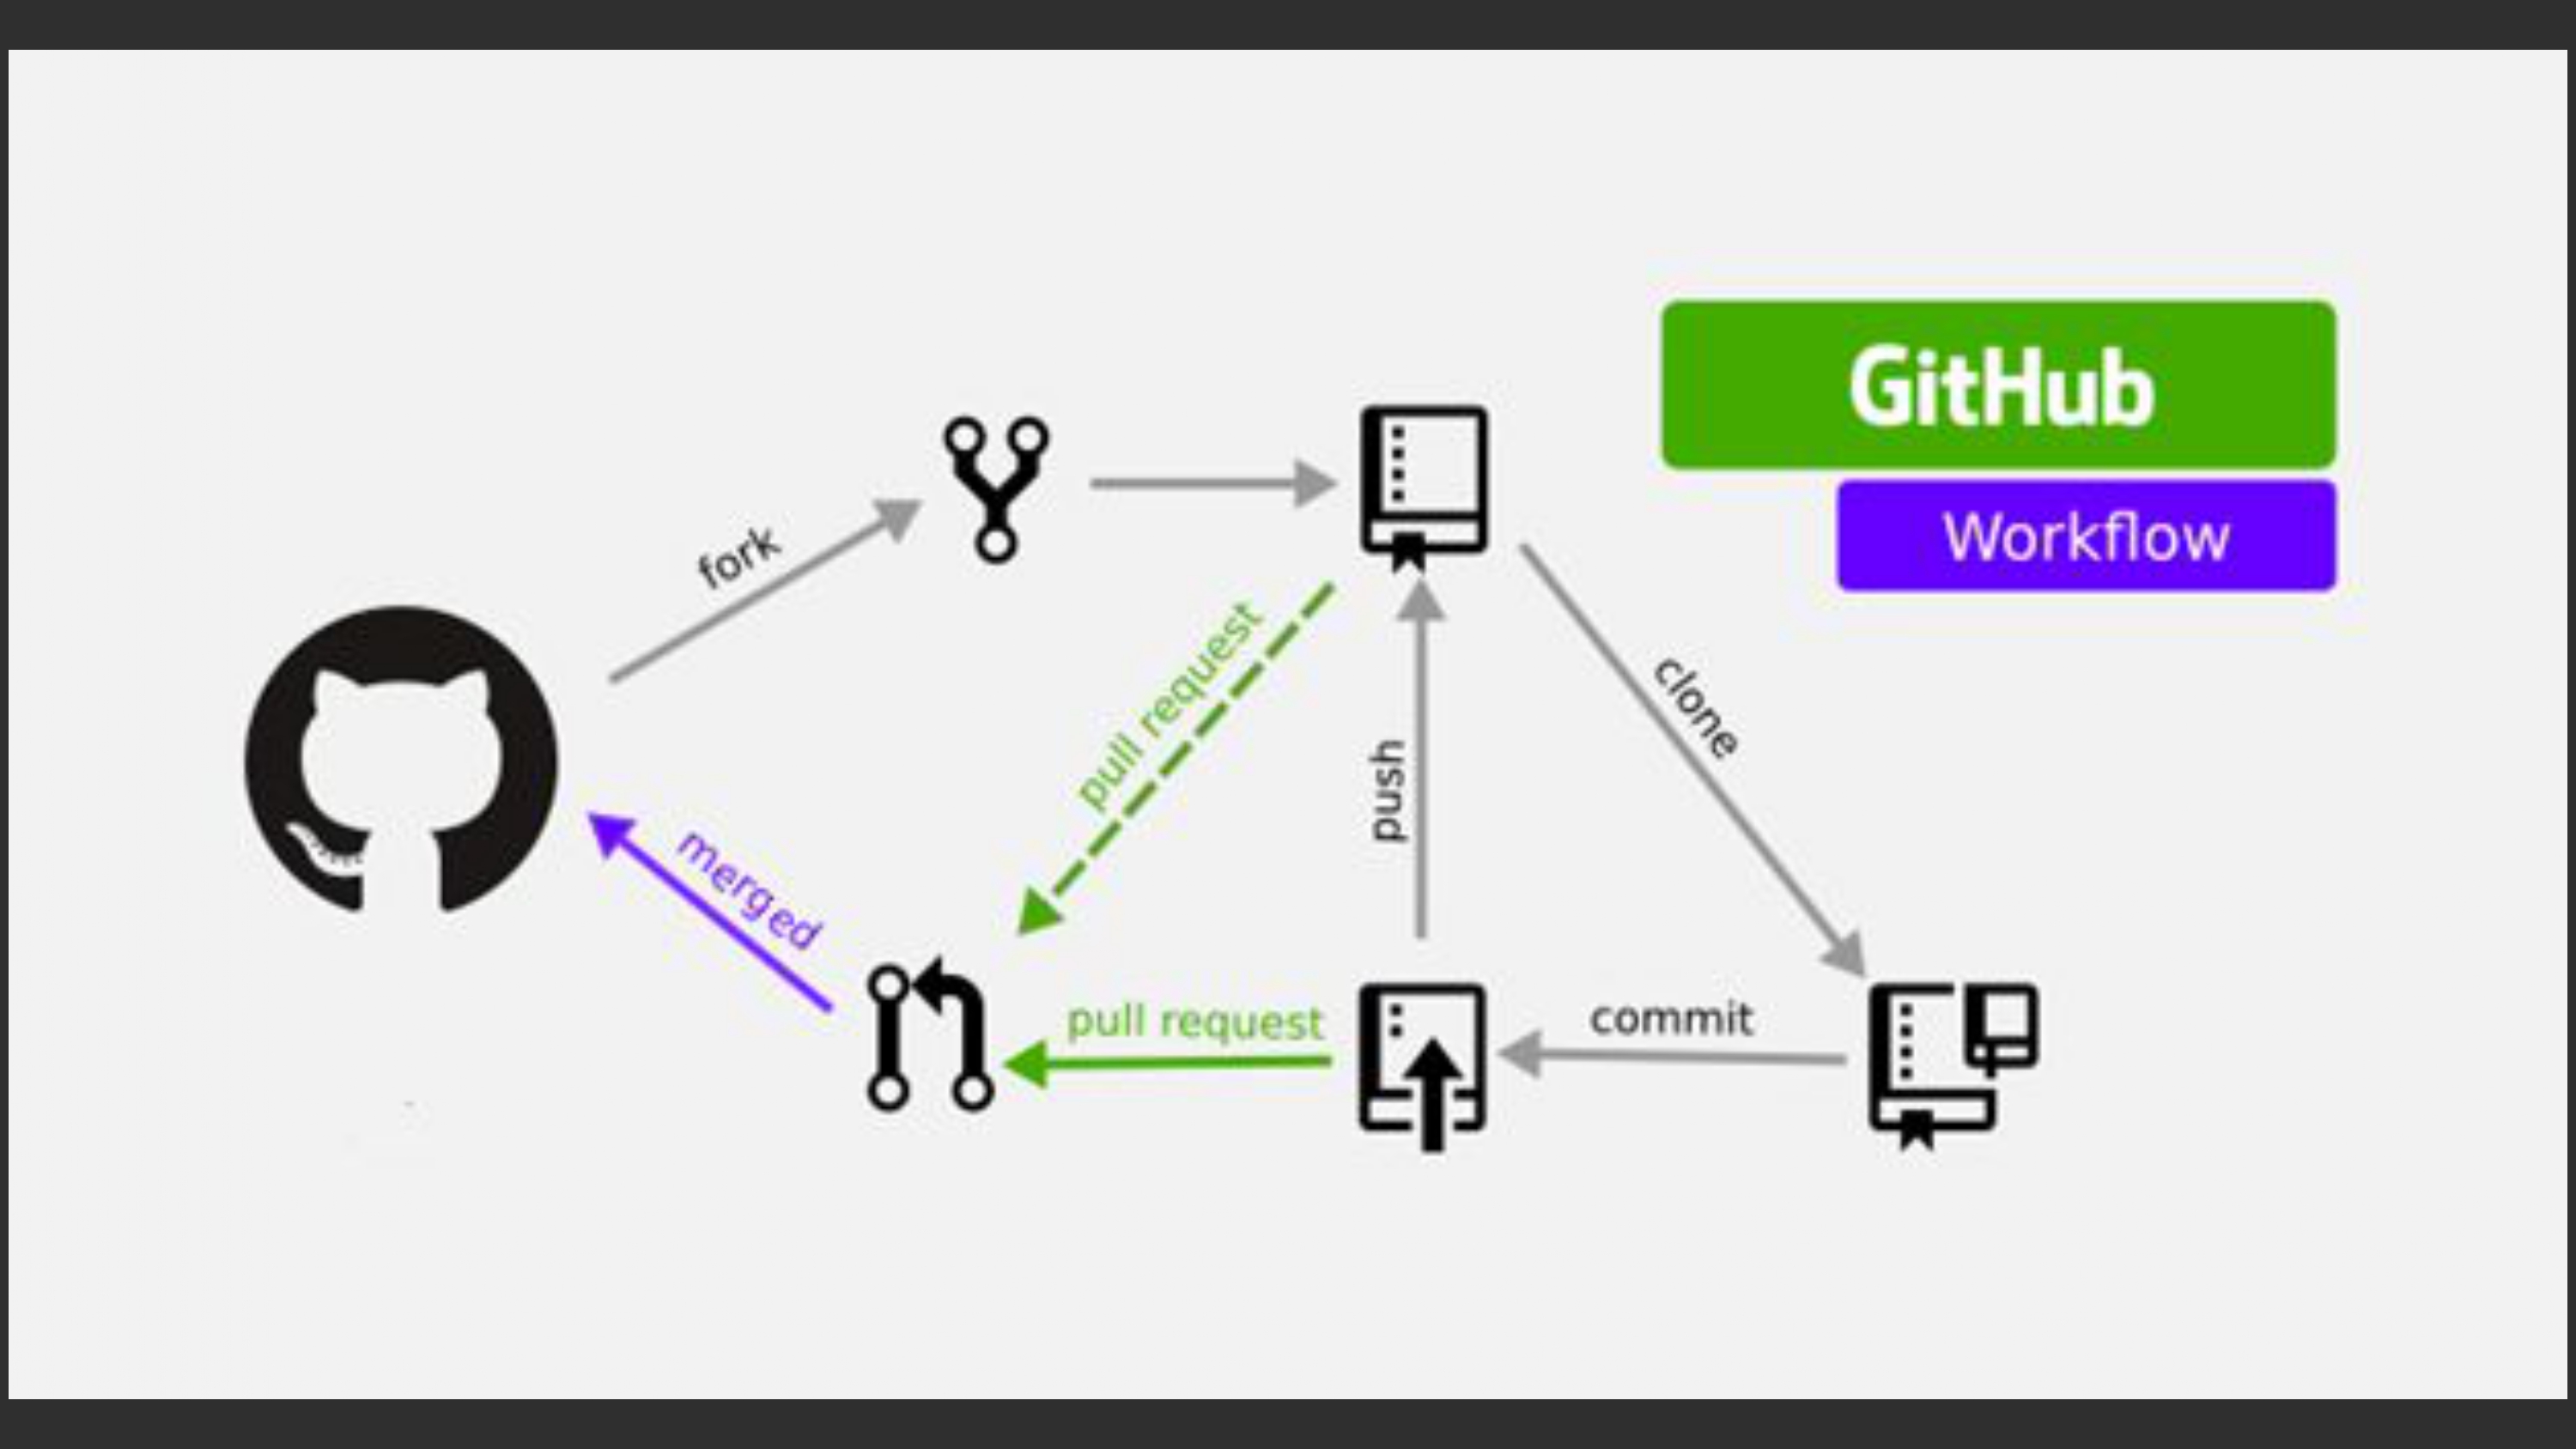 Git is the collaboration tool that software engineers built for themselves. It allows people to work asynchronously, and additional software such as Github builds on Git to allow review and merging of work in an asynchronous manner.